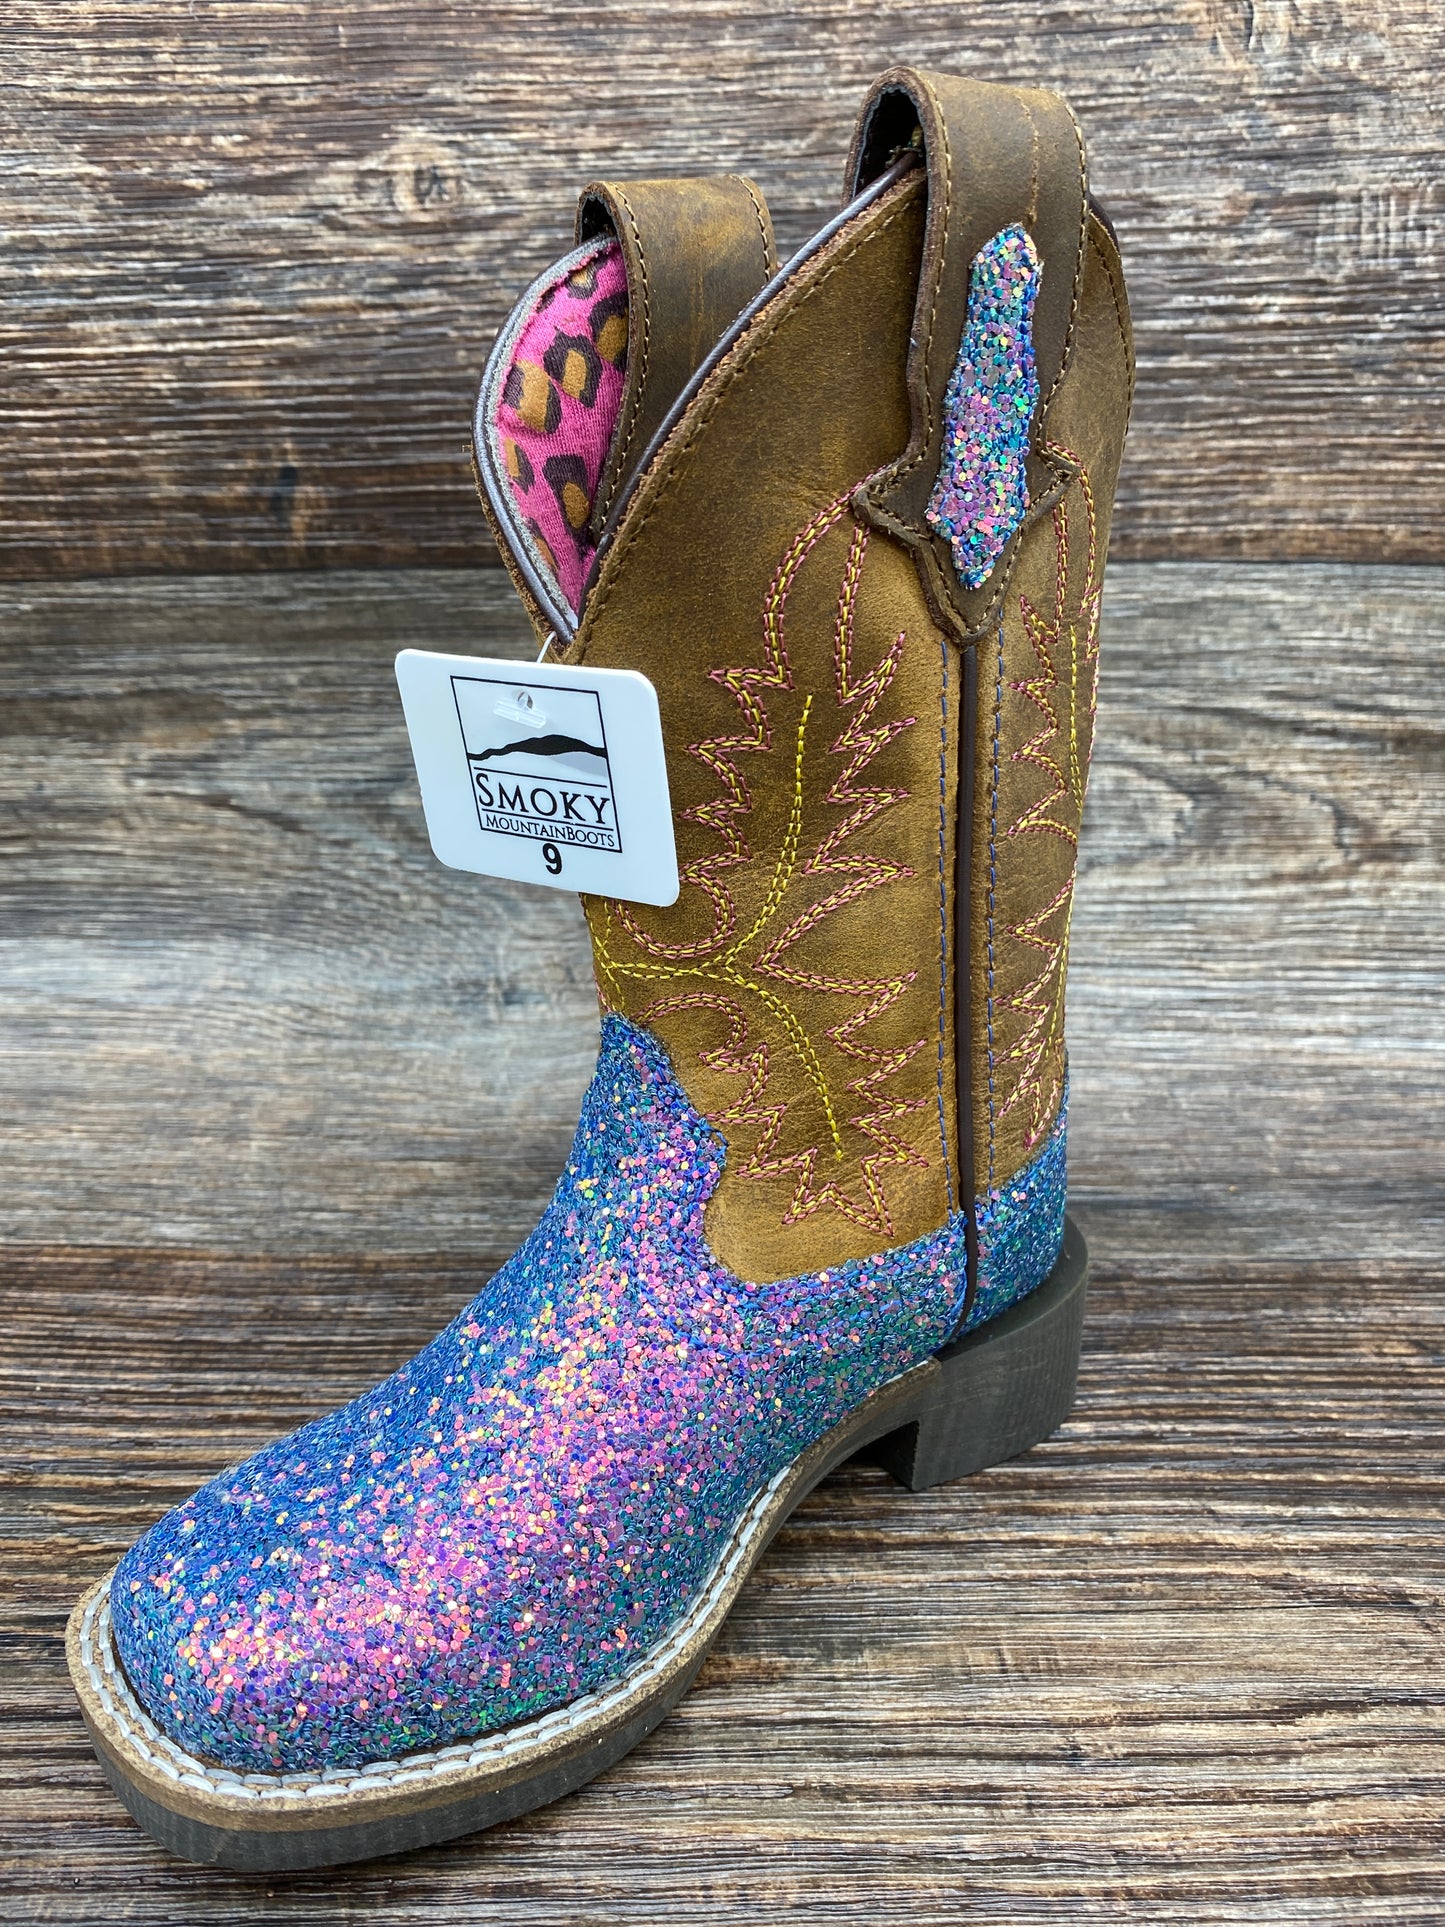 3077c Kid's Pastel Glitter Square Toe Western Boots by Smoky Mountain - 3077C Children's Sizes 8.5-3